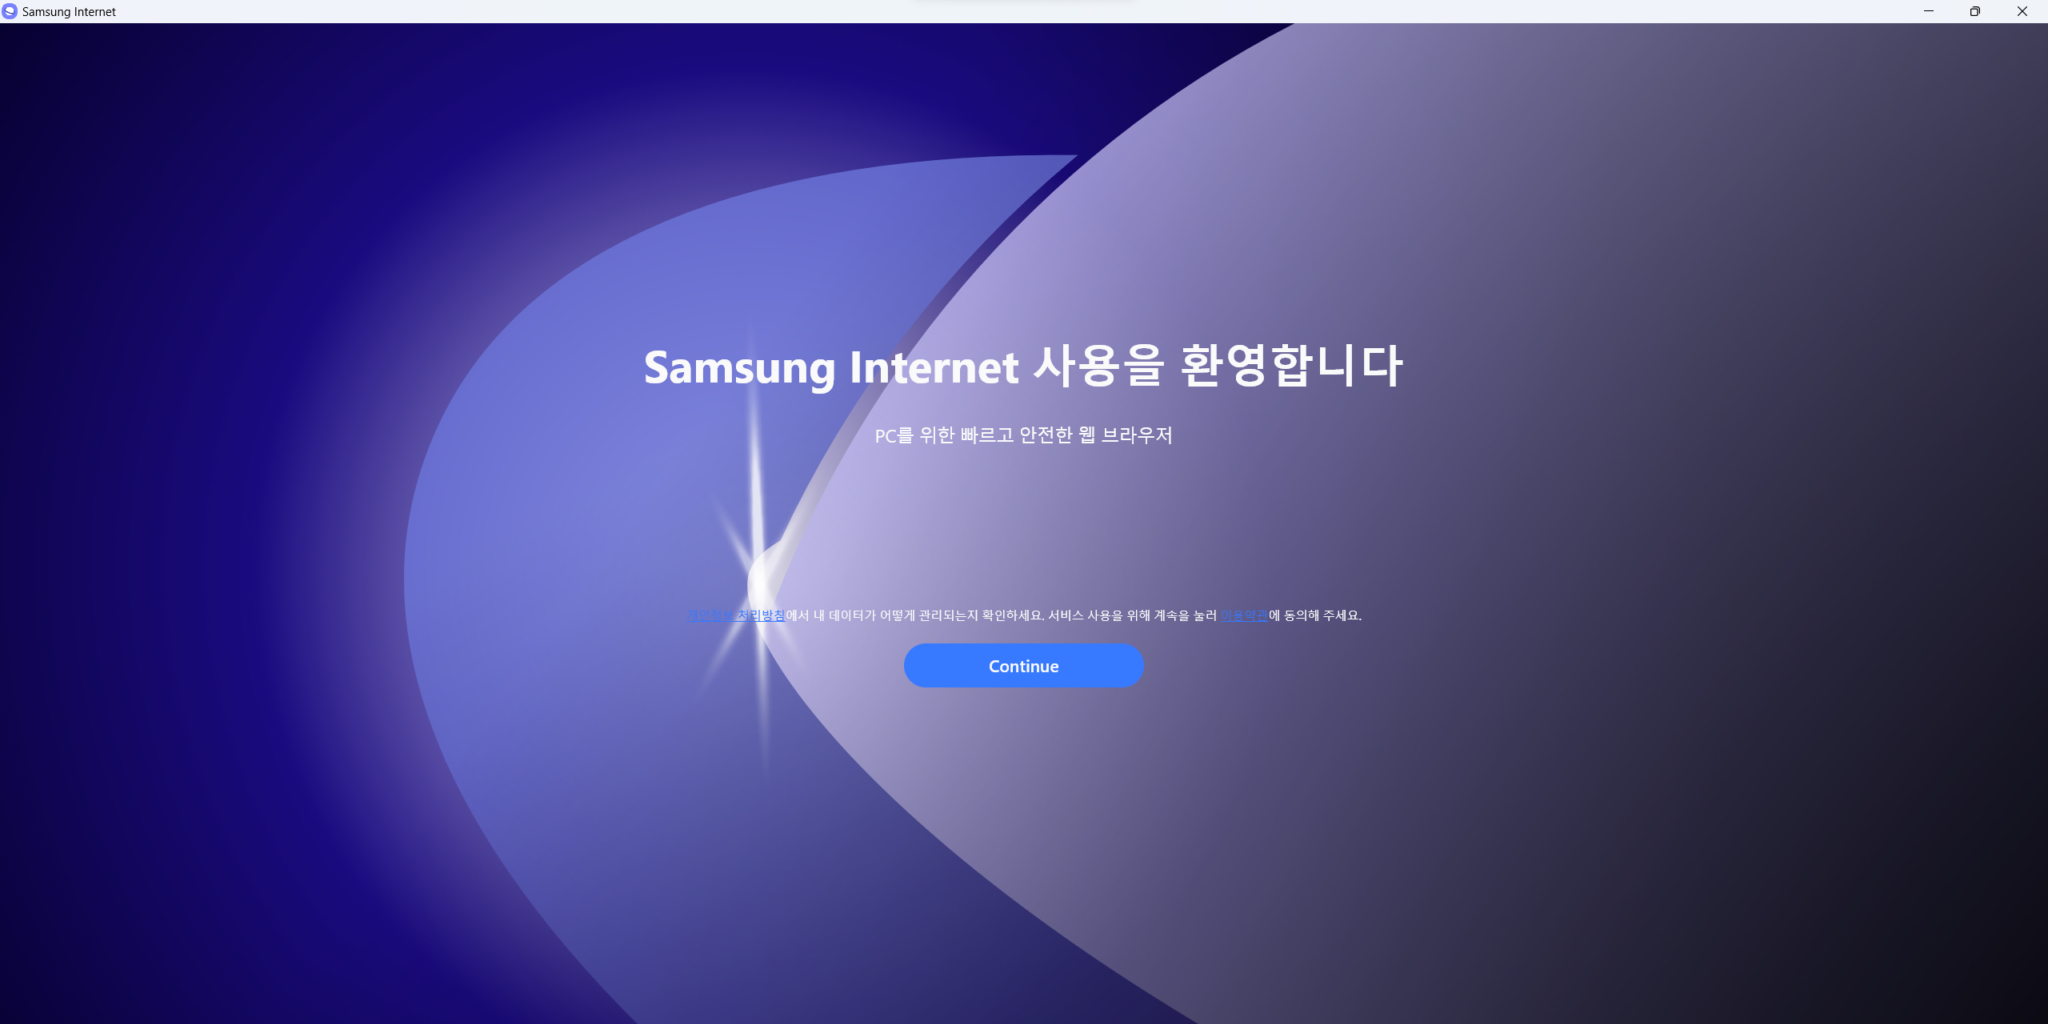 Samsung Internet browser is out for Windows